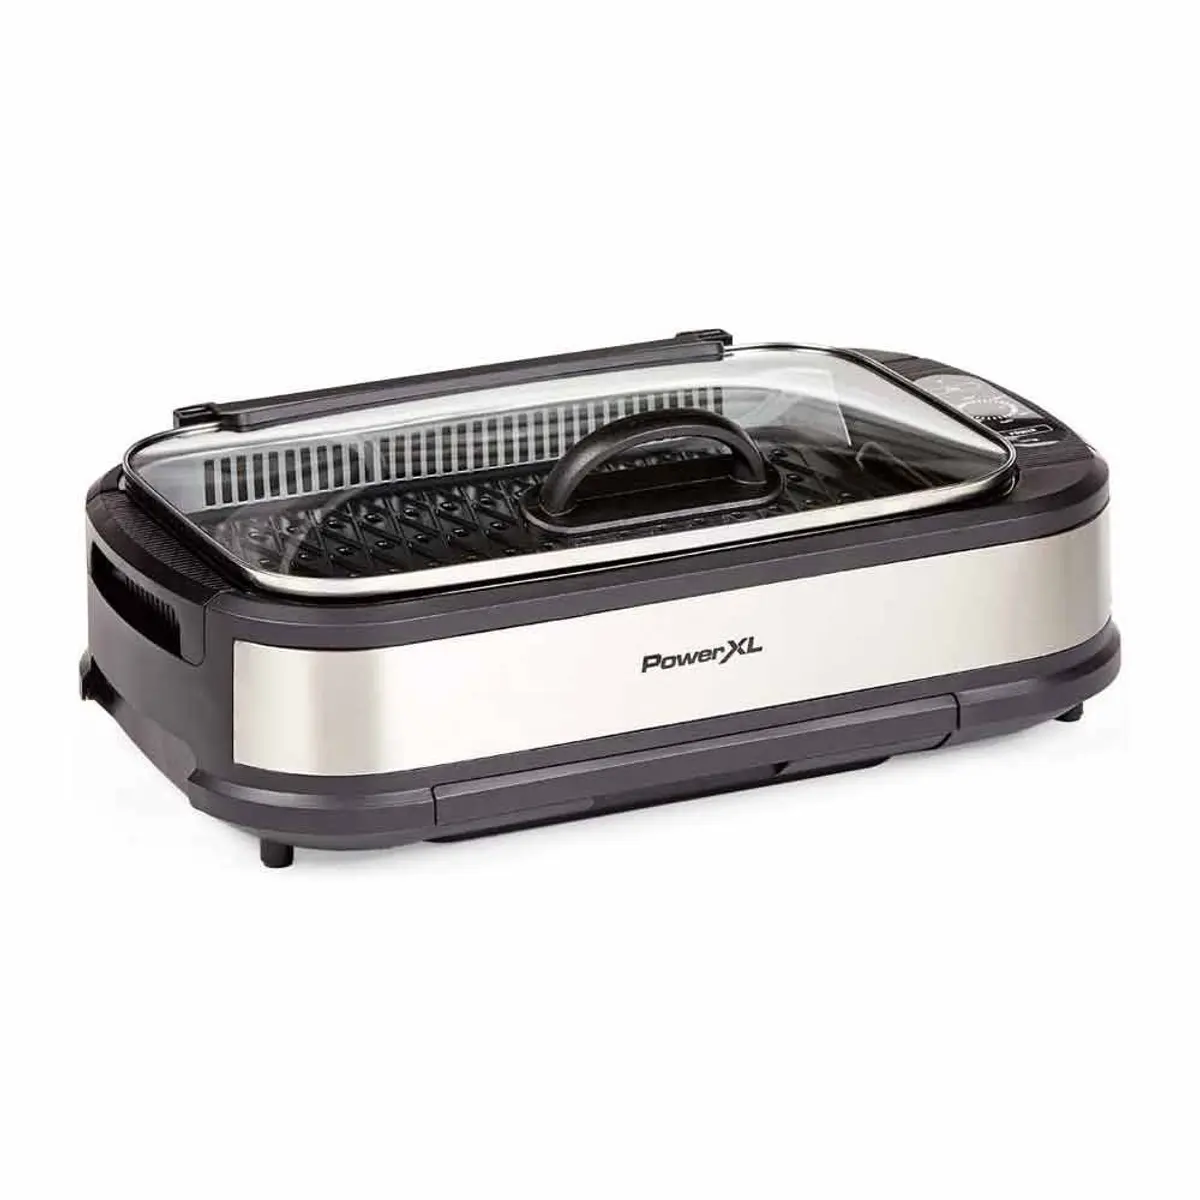 PowerXL Smokeless Grill with Tempered Glass Lid and Turbo Speed Smoke